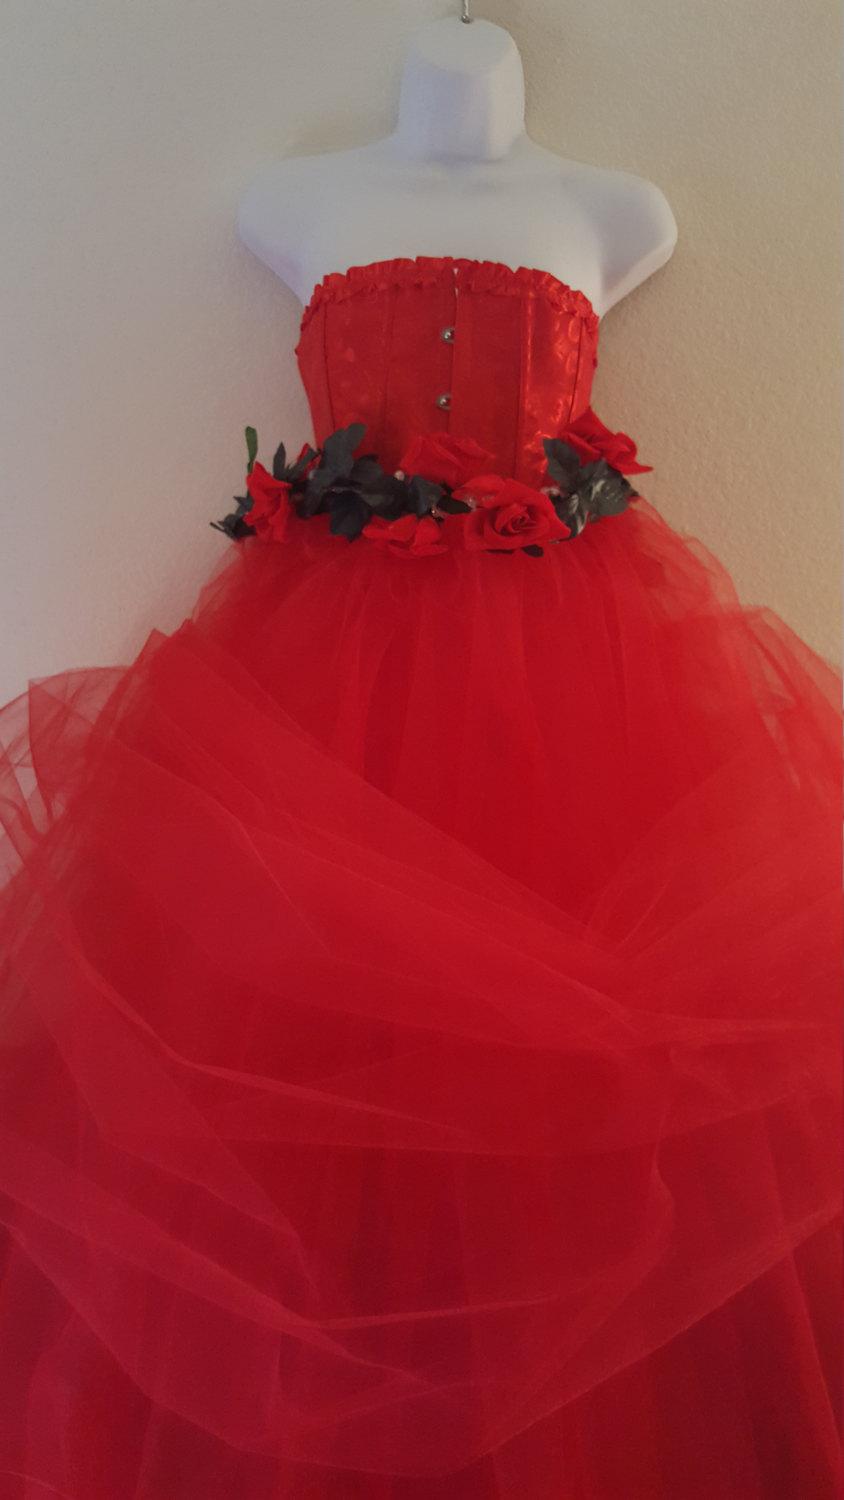 Wedding - Sample Gown Listing / Valentine Rose Goddess Romantic Red Corset Tulle Ball Gown Dress Bridal Wedding Gown Party Costume